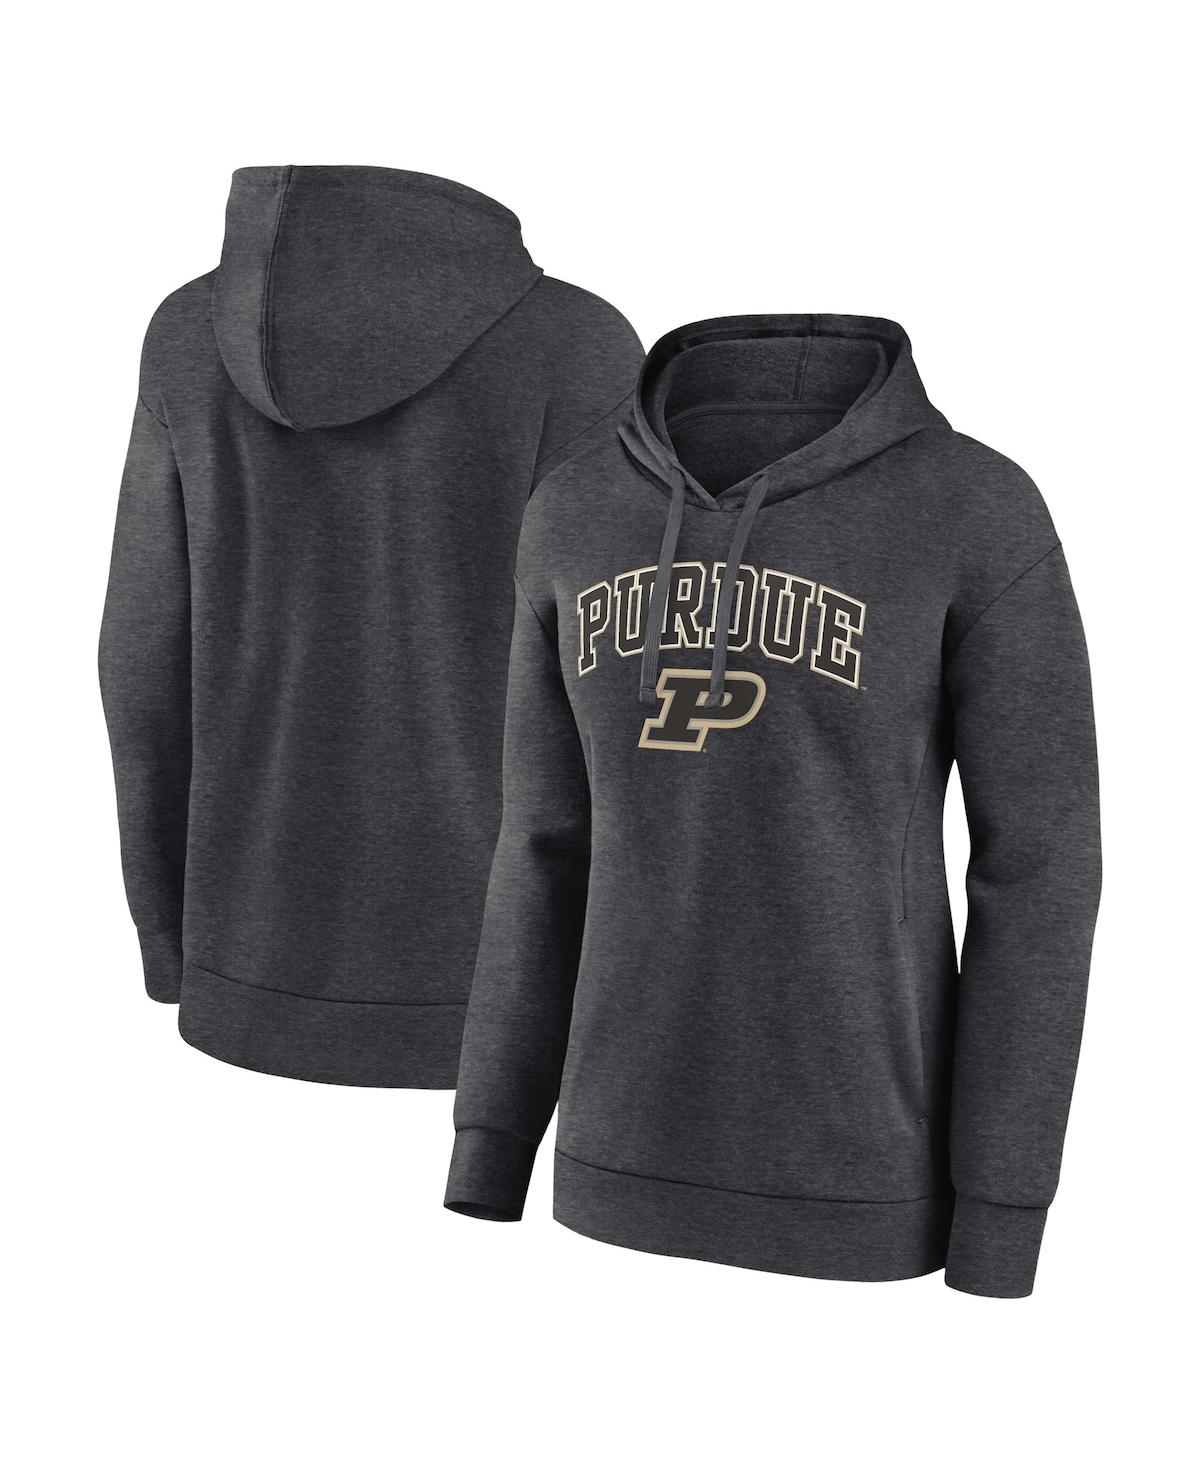 Fanatics Women's  Heather Charcoal Purdue Boilermakers Evergreen Campus Pullover Hoodie